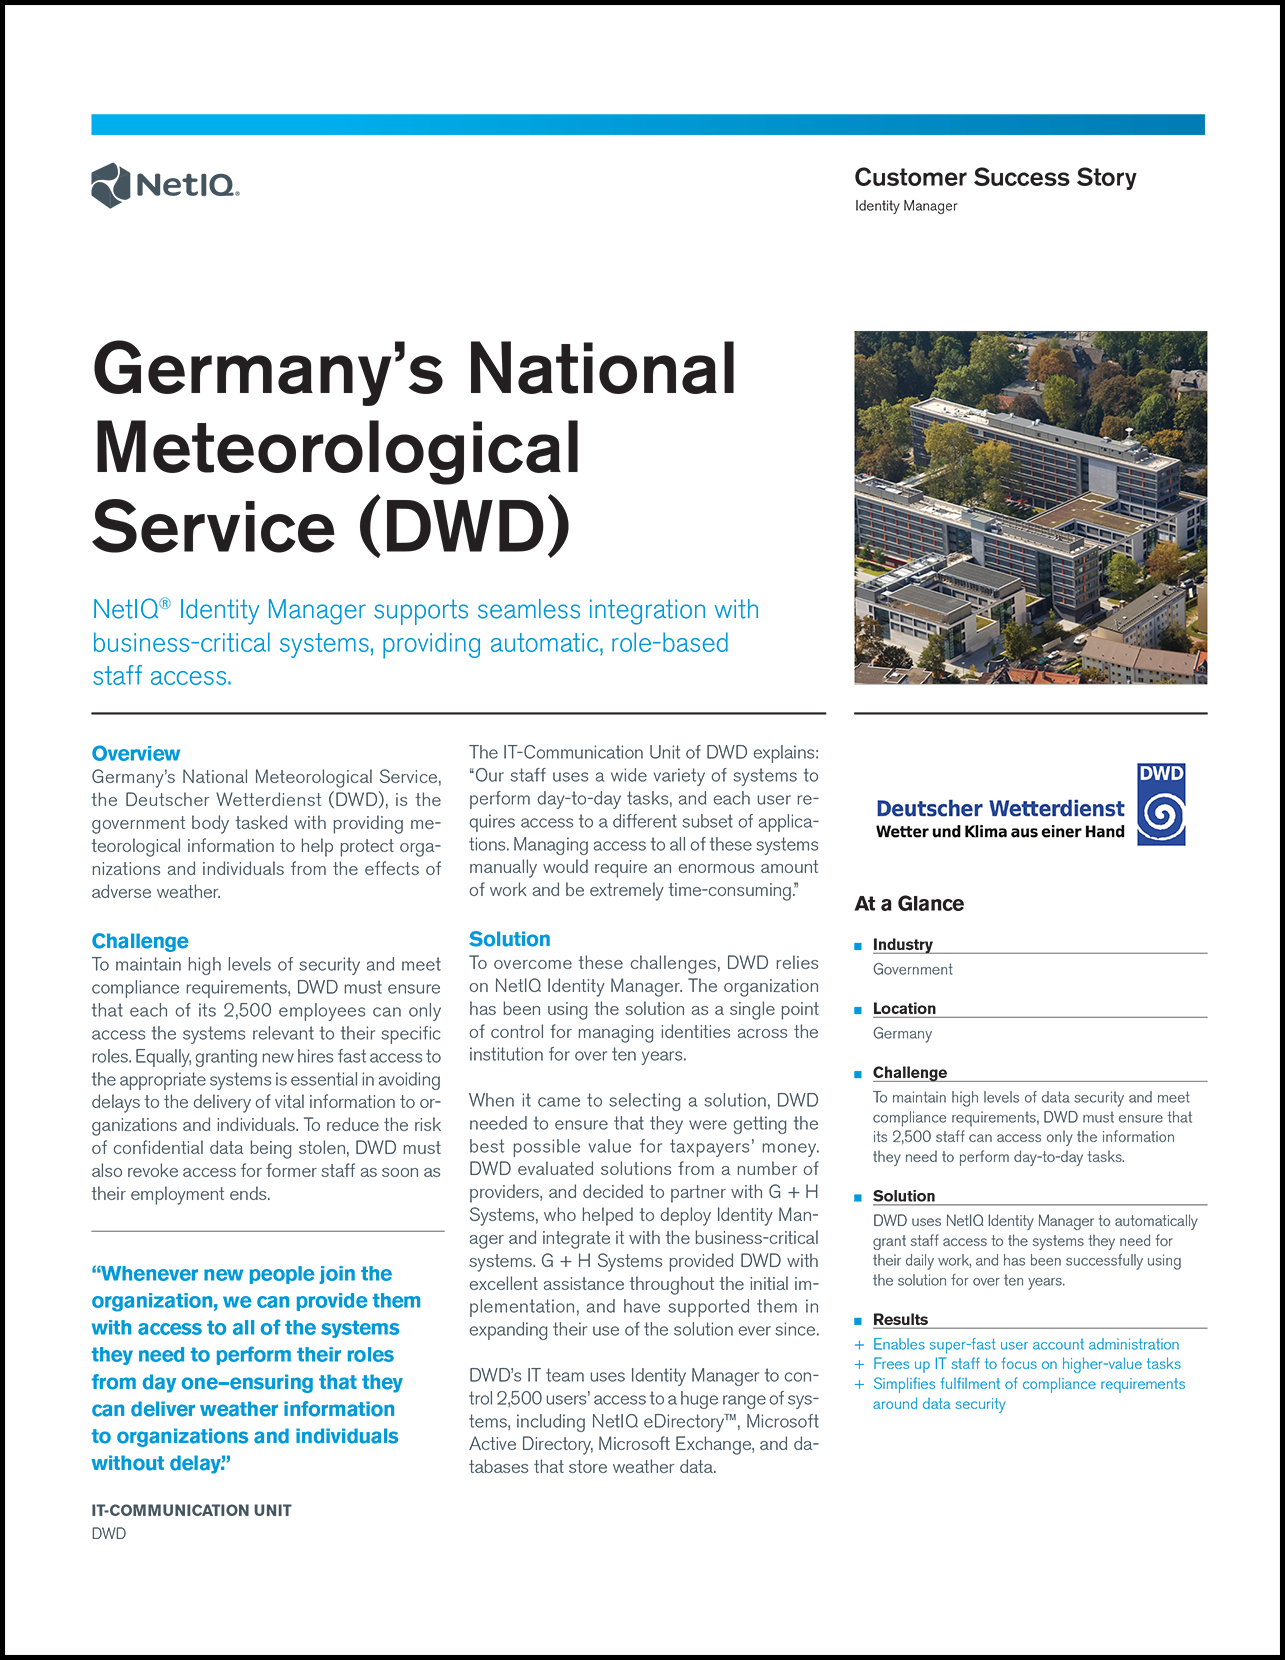 NetIQ Identity Manager Supports Seamless Integration for Germany's National Meteorological Service preview